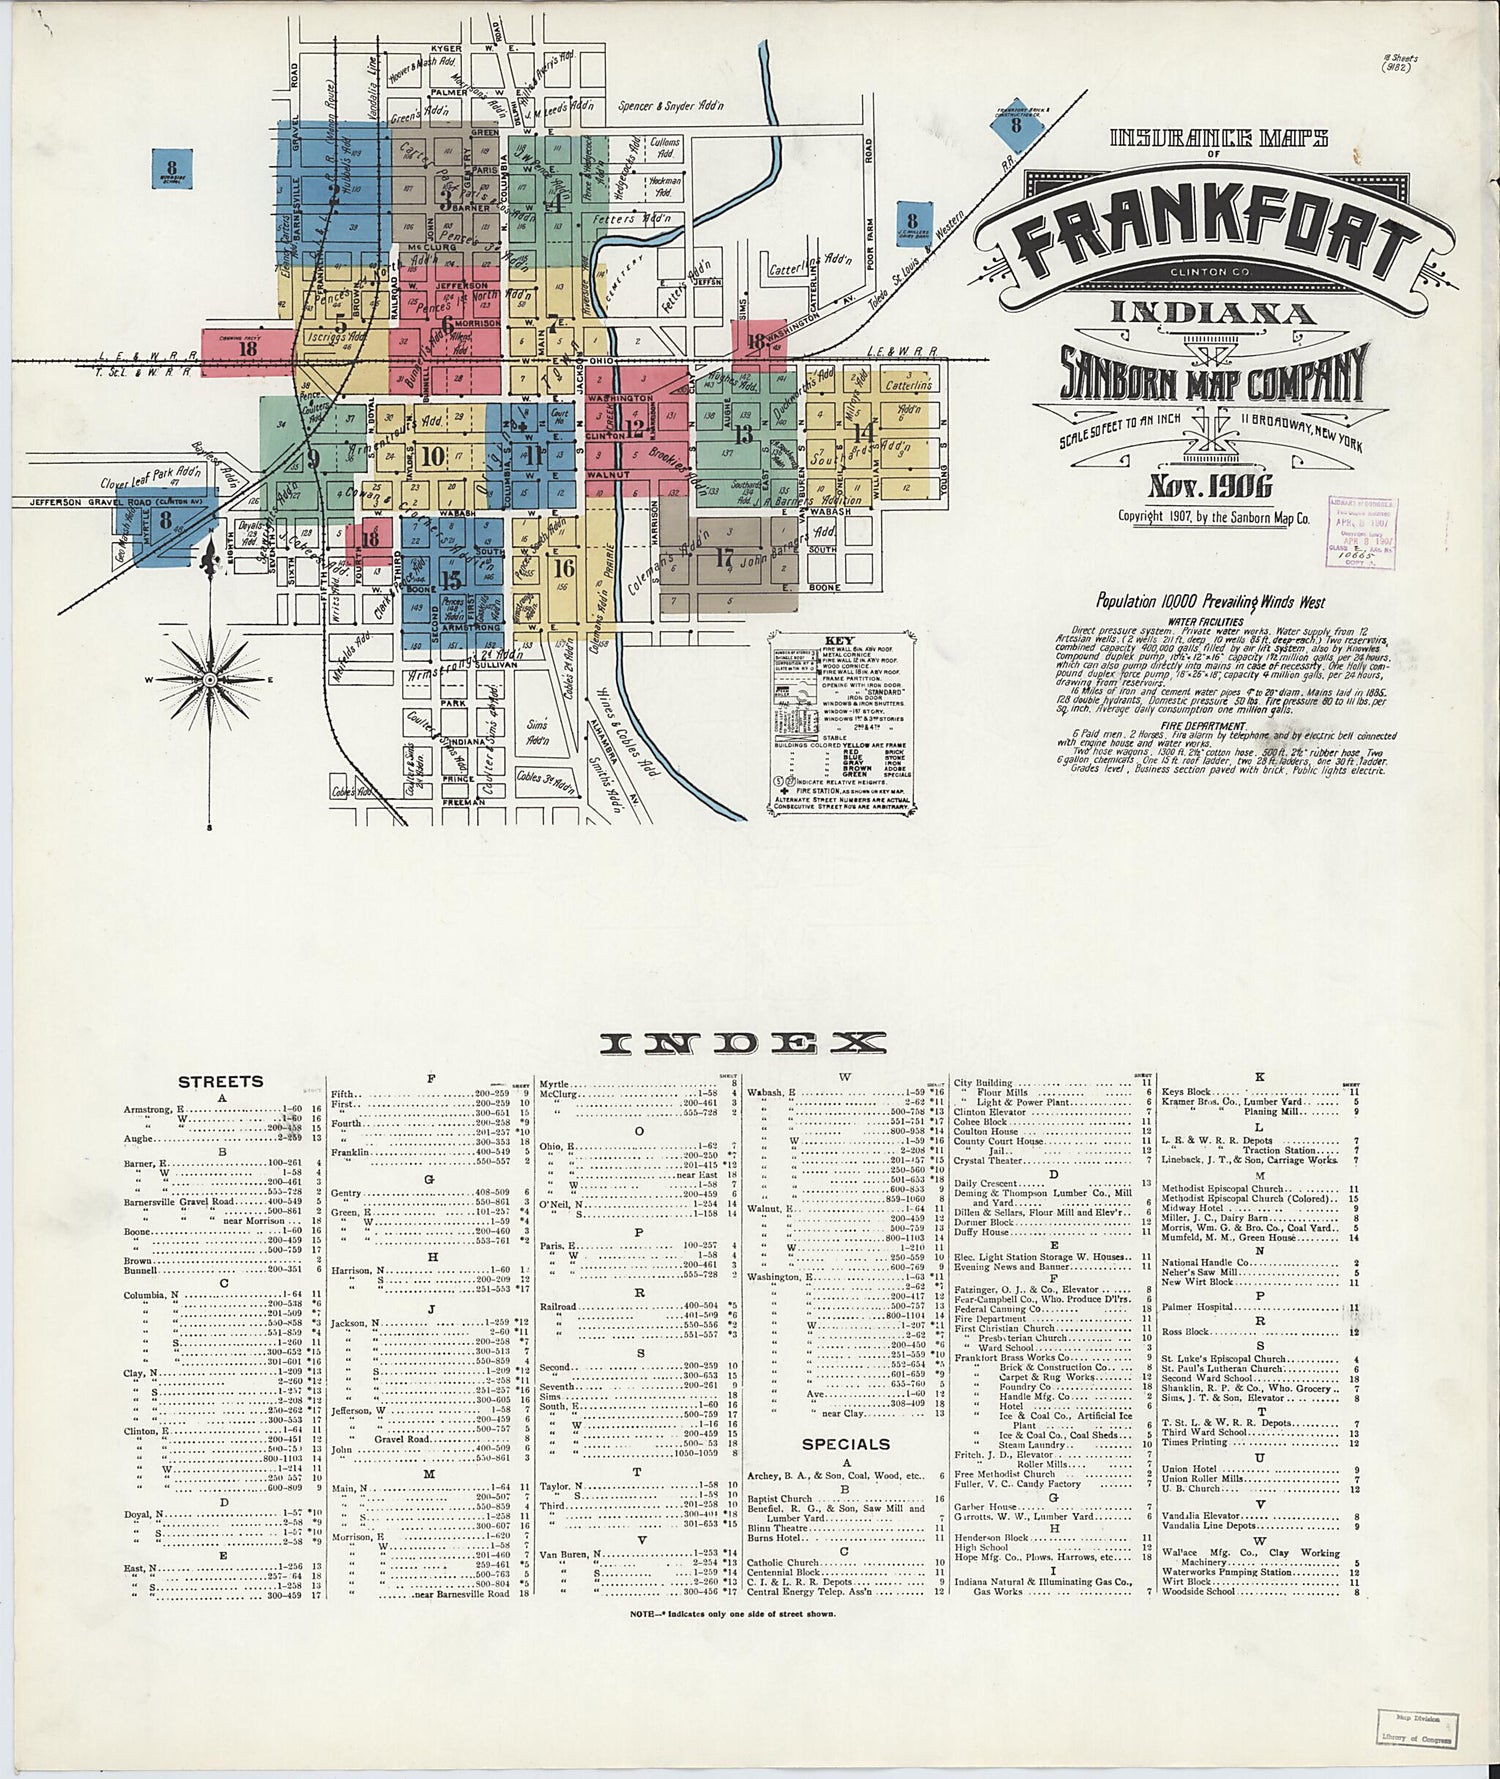 This old map of Frankfort, Clinton County, Indiana was created by Sanborn Map Company in 1906